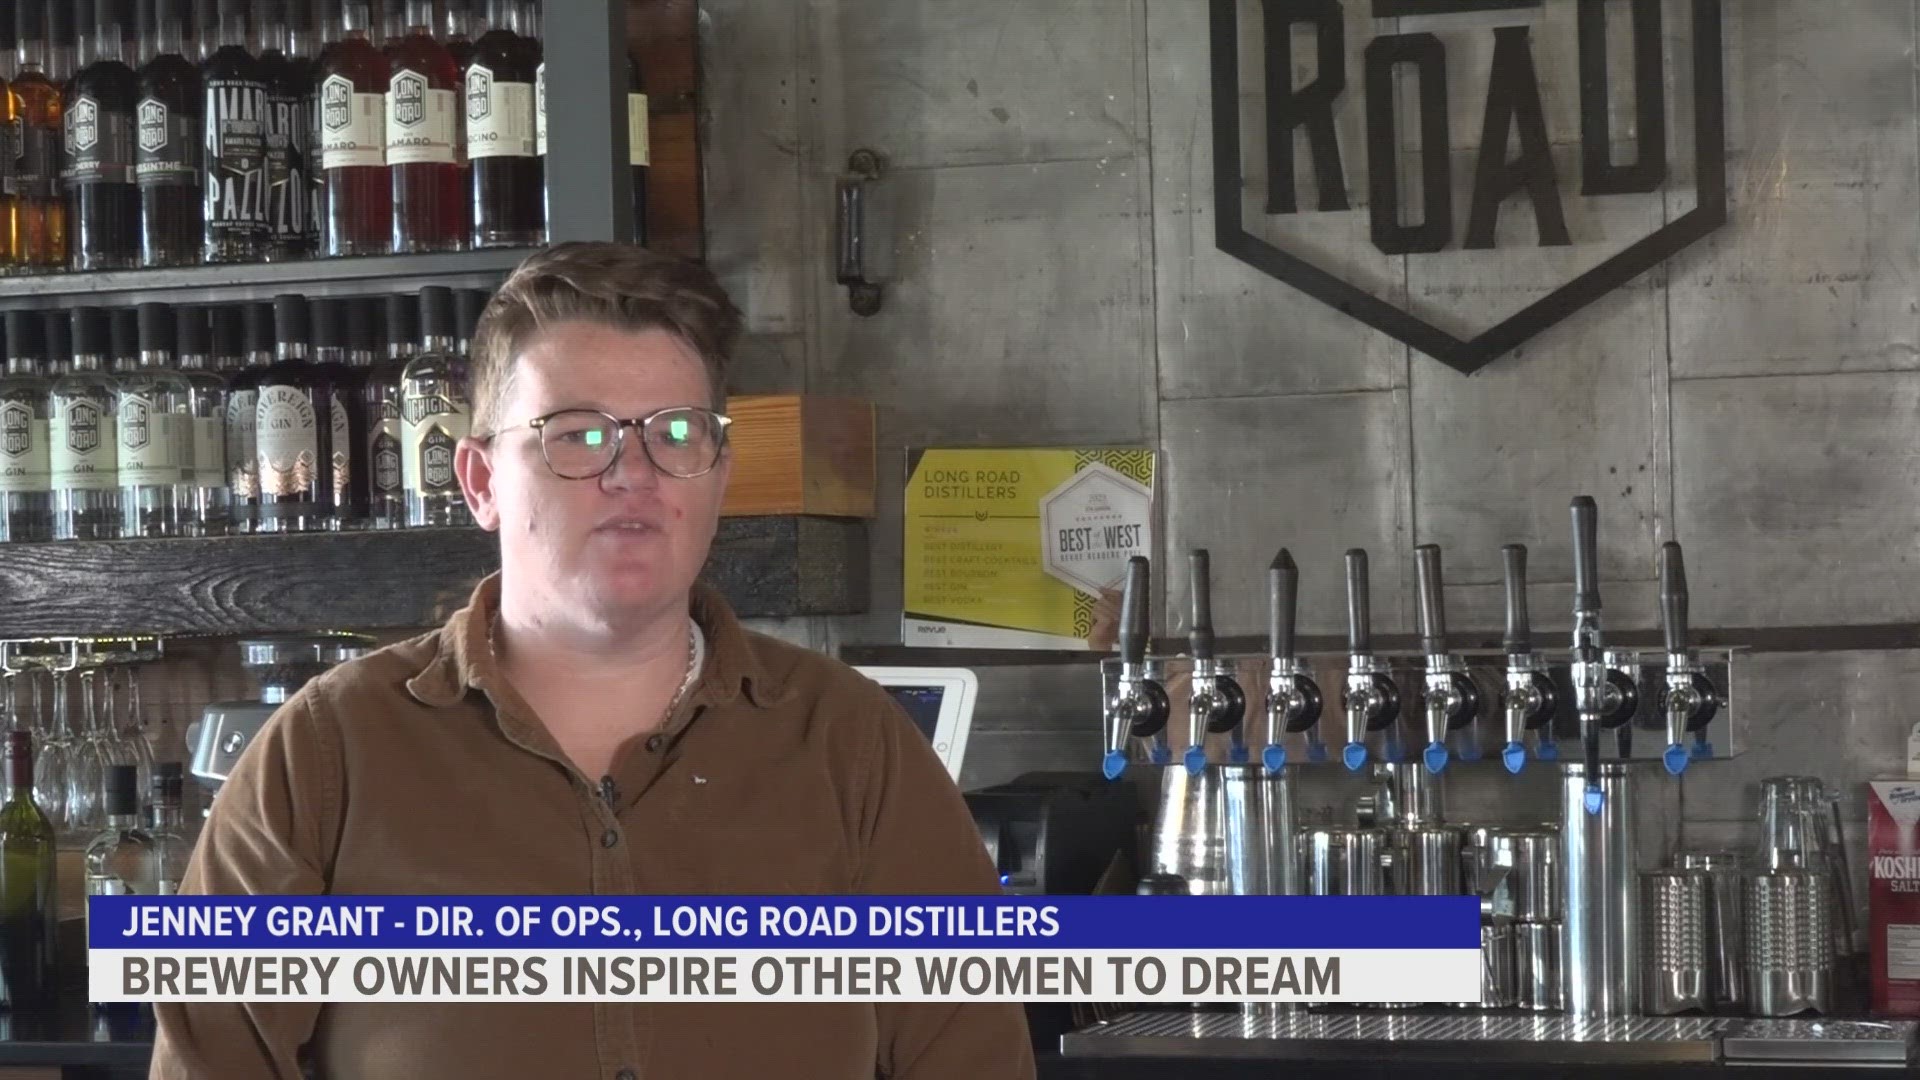 Two female business owners hope that others can follow in their footsteps in the booming West Michigan beer industry.